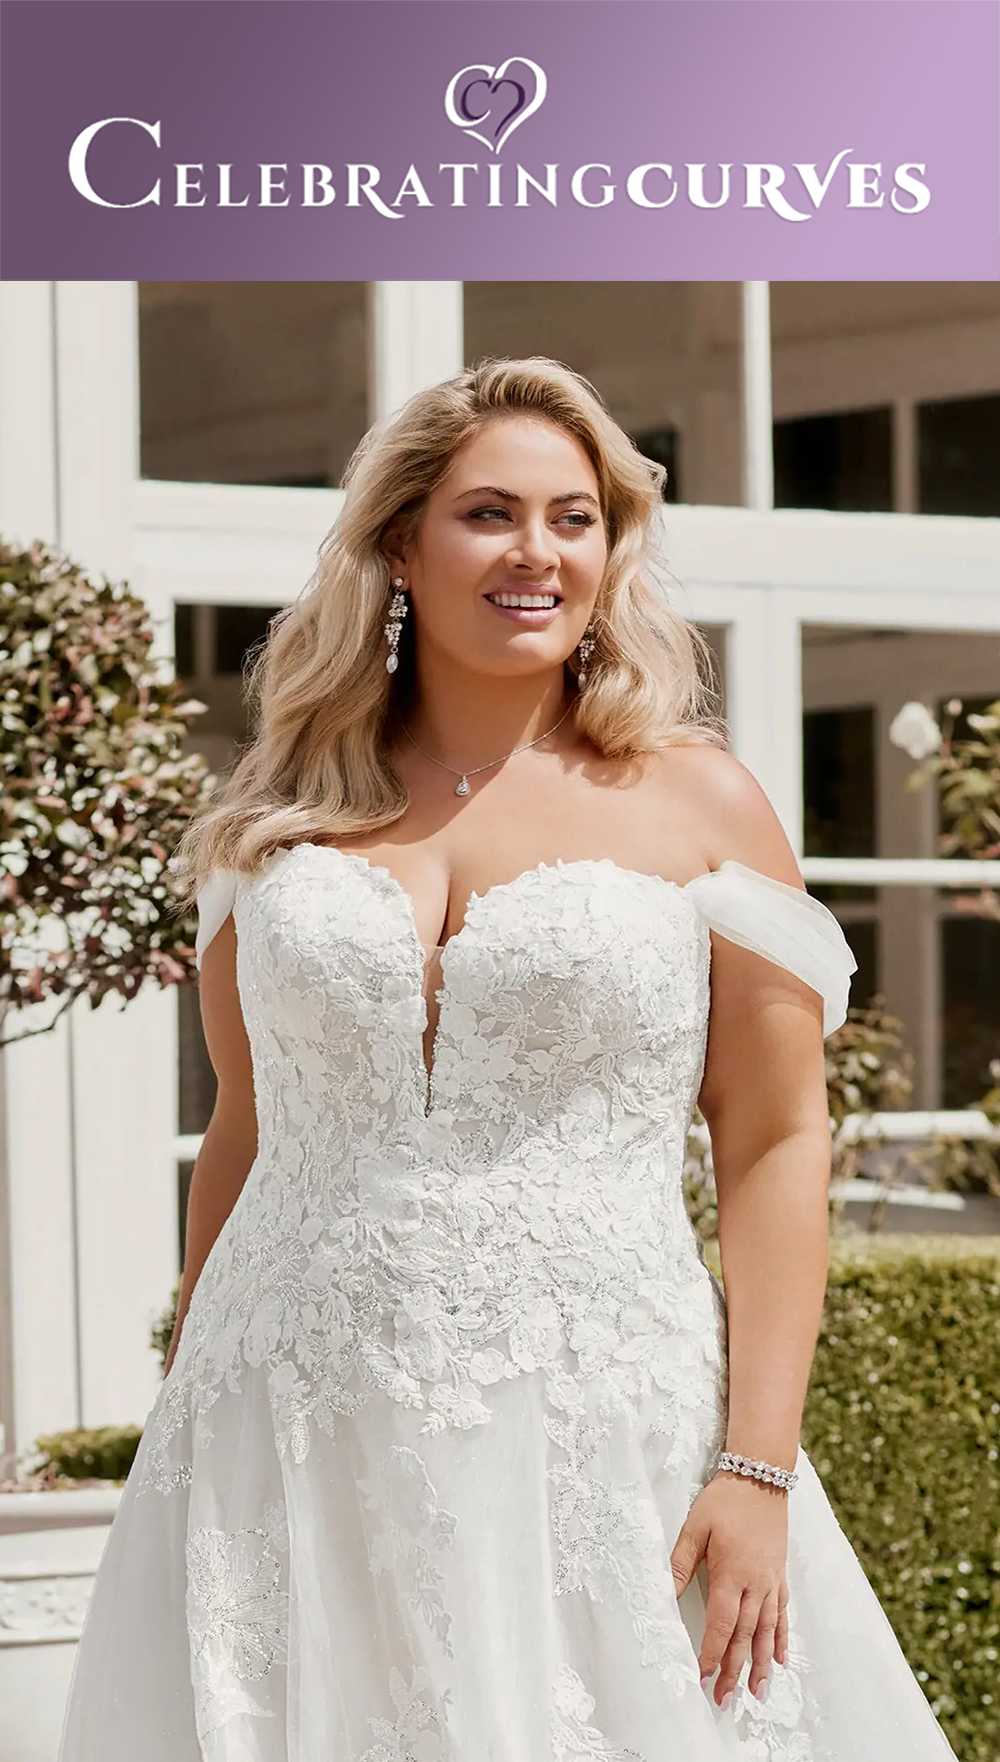 Celebrating Curves - the bridal studio devoted to fuller figure brides in sizes 16 to 30 plus - The Bride - Celebrating Curves - the bridal studio devoted to curvaceous fuller